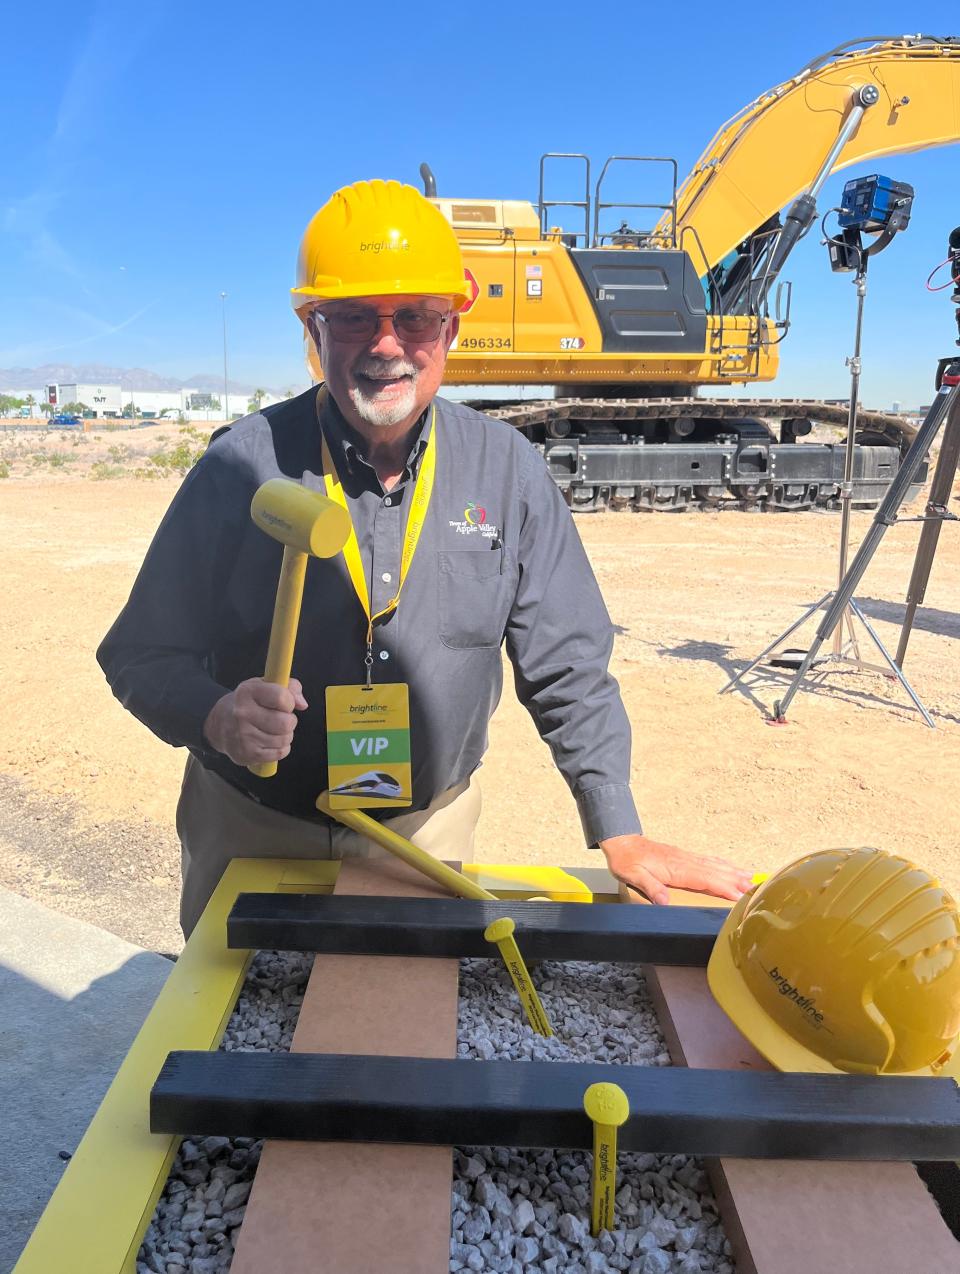 San Bernardino County Transportation Authority’s Immediate Past President Art Bishop, who also serves as Apple Valley’s mayor pro tem, attended Monday's groundbreaking celebration in Las Vegas for Brightline West's high-speed rail system which will connect Las Vegas to Southern California.